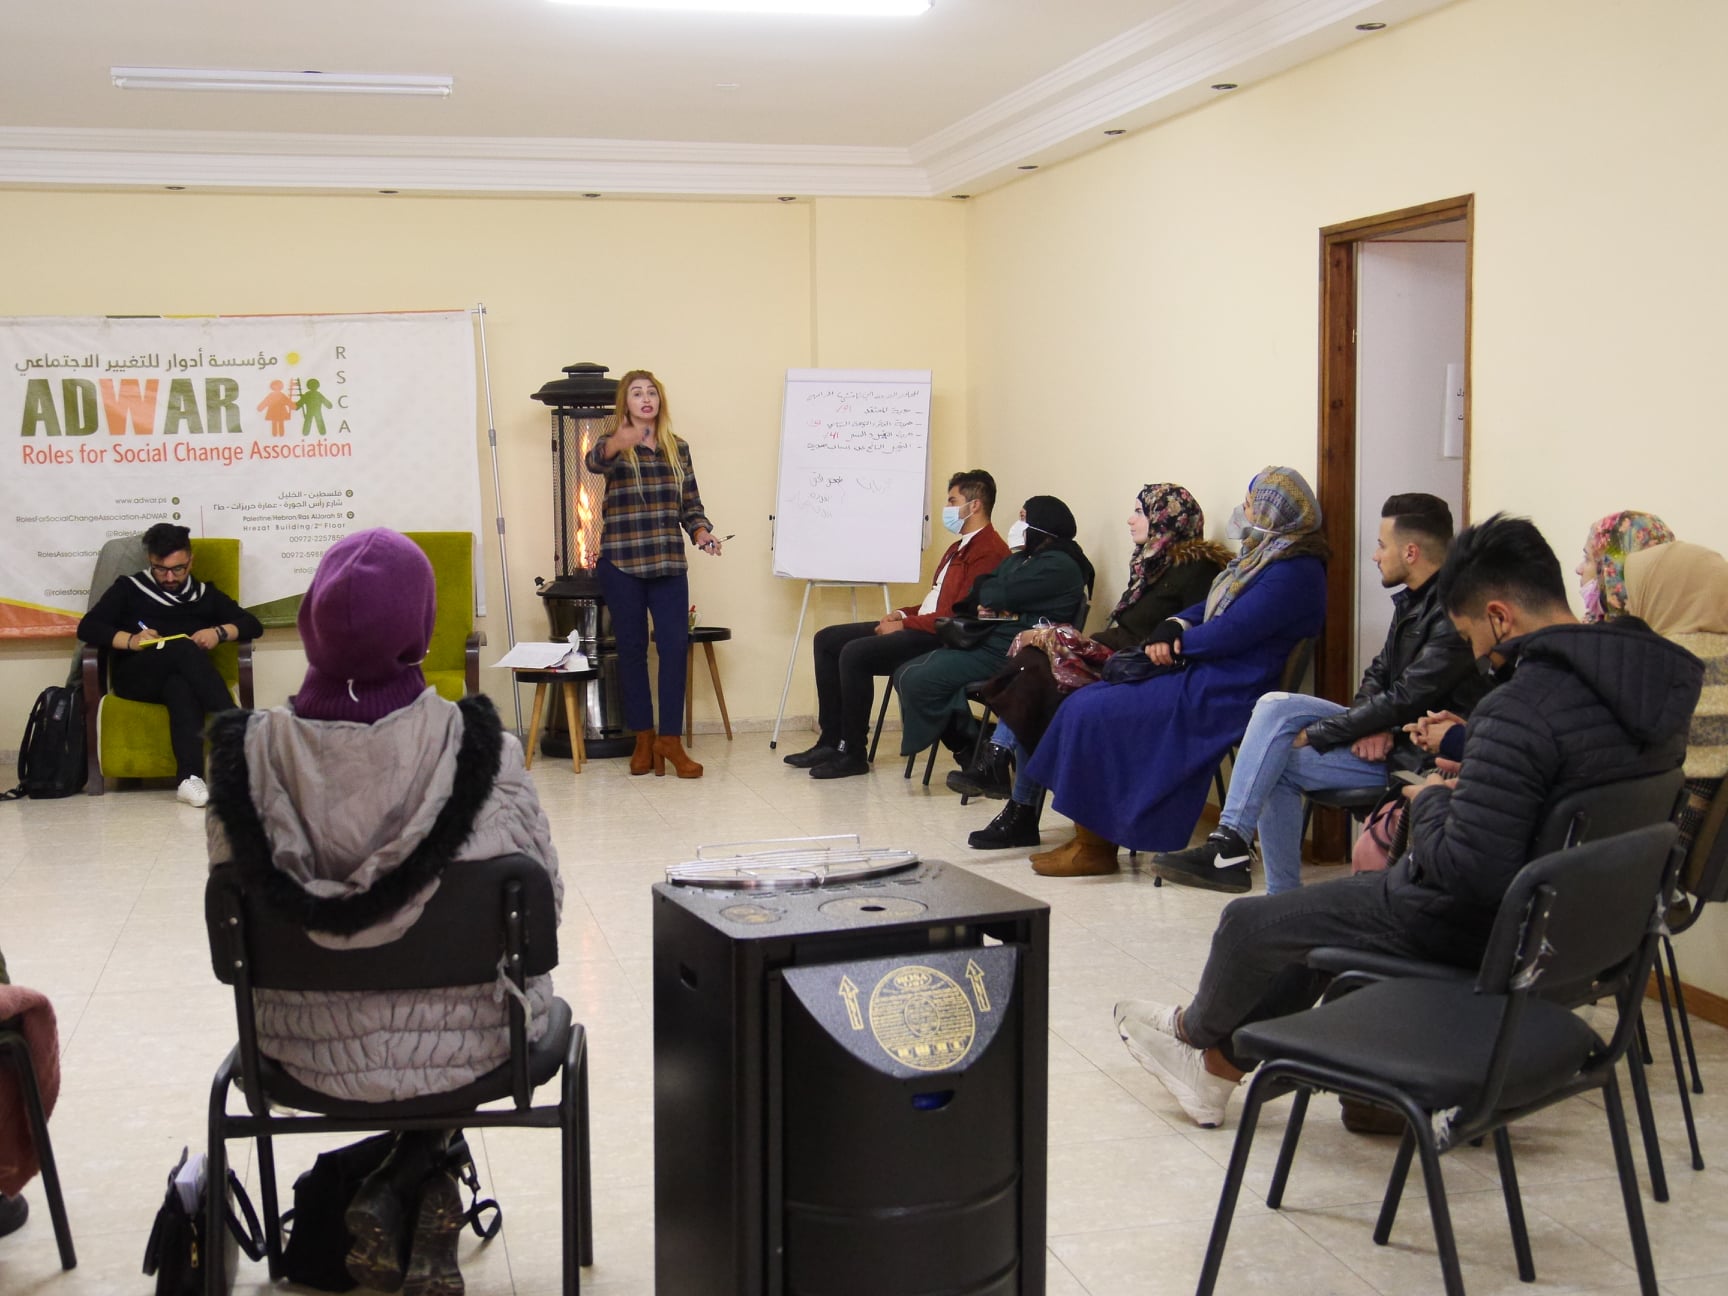  ” Freedoms and Equality in Palestine” Workshop